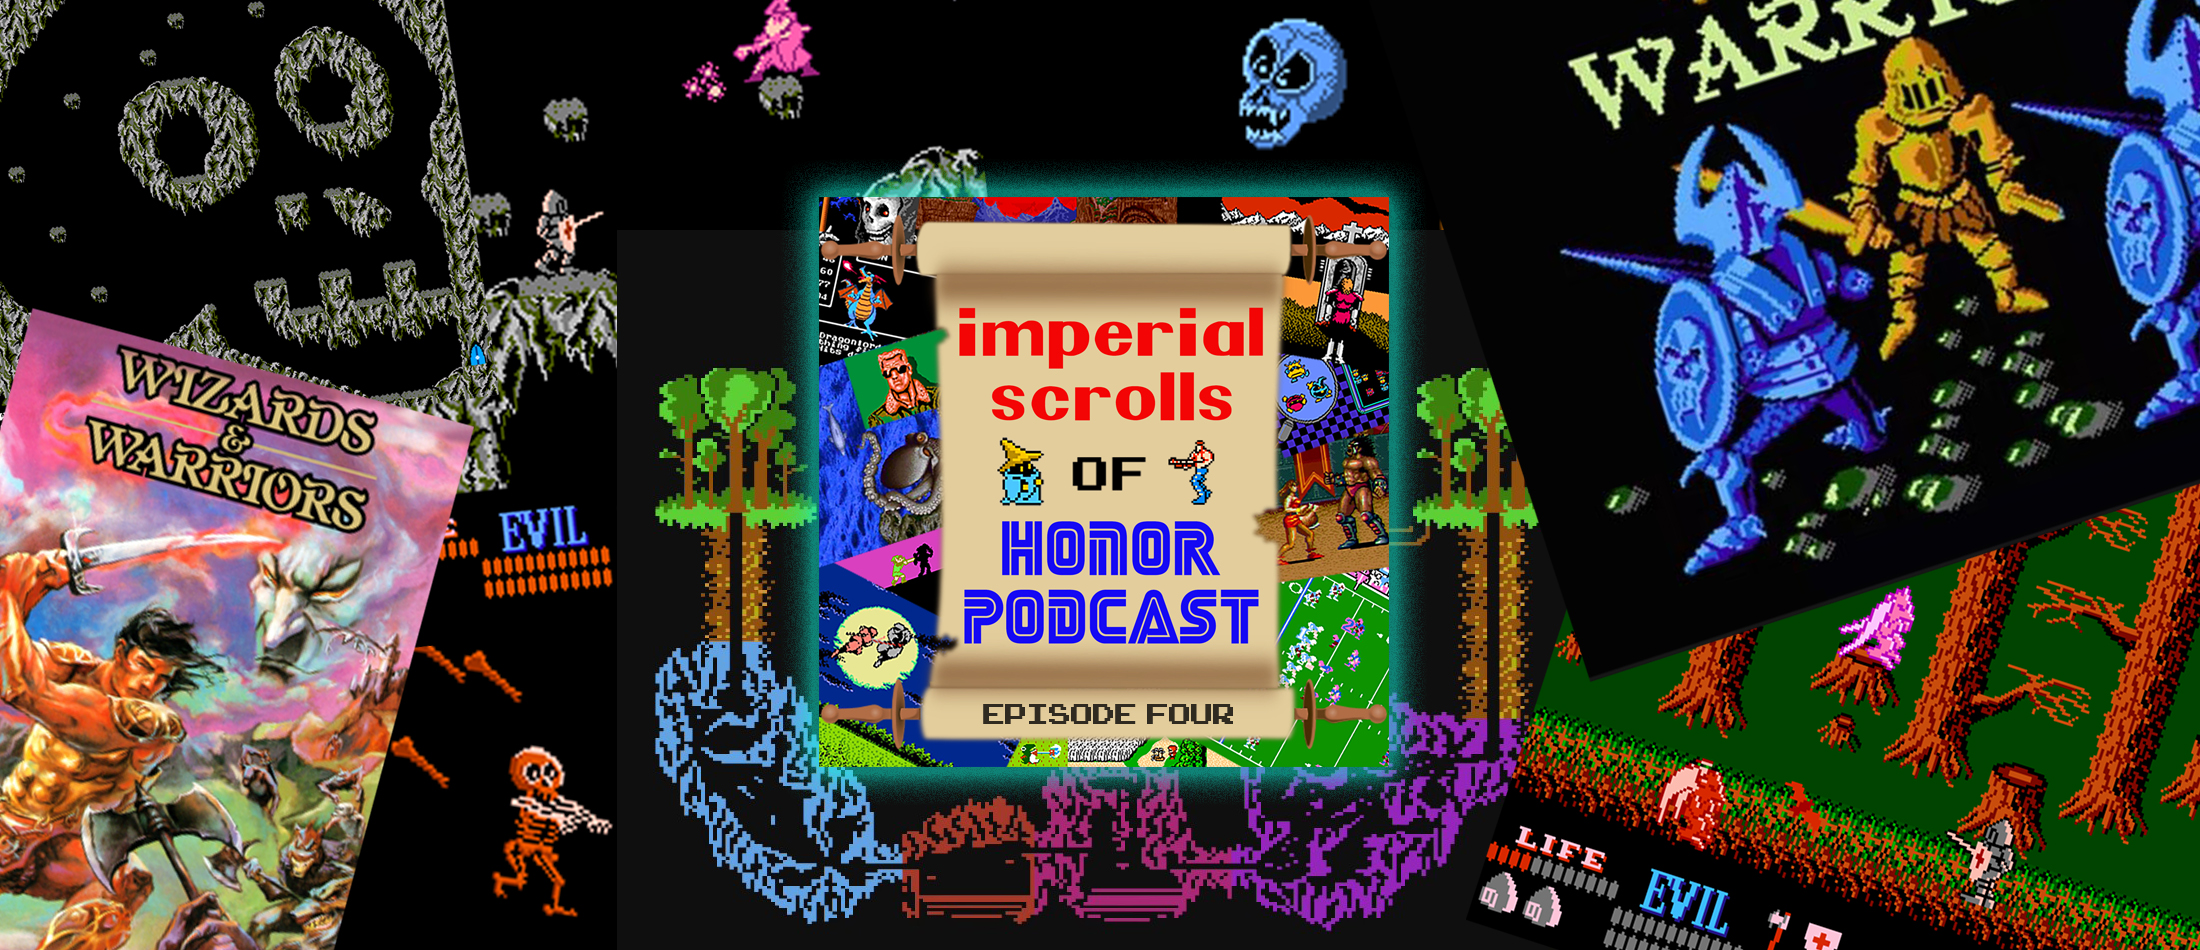 Imperial Scrolls of Honor Podcast - Episode 4 - Wizards & Warriors (NES)